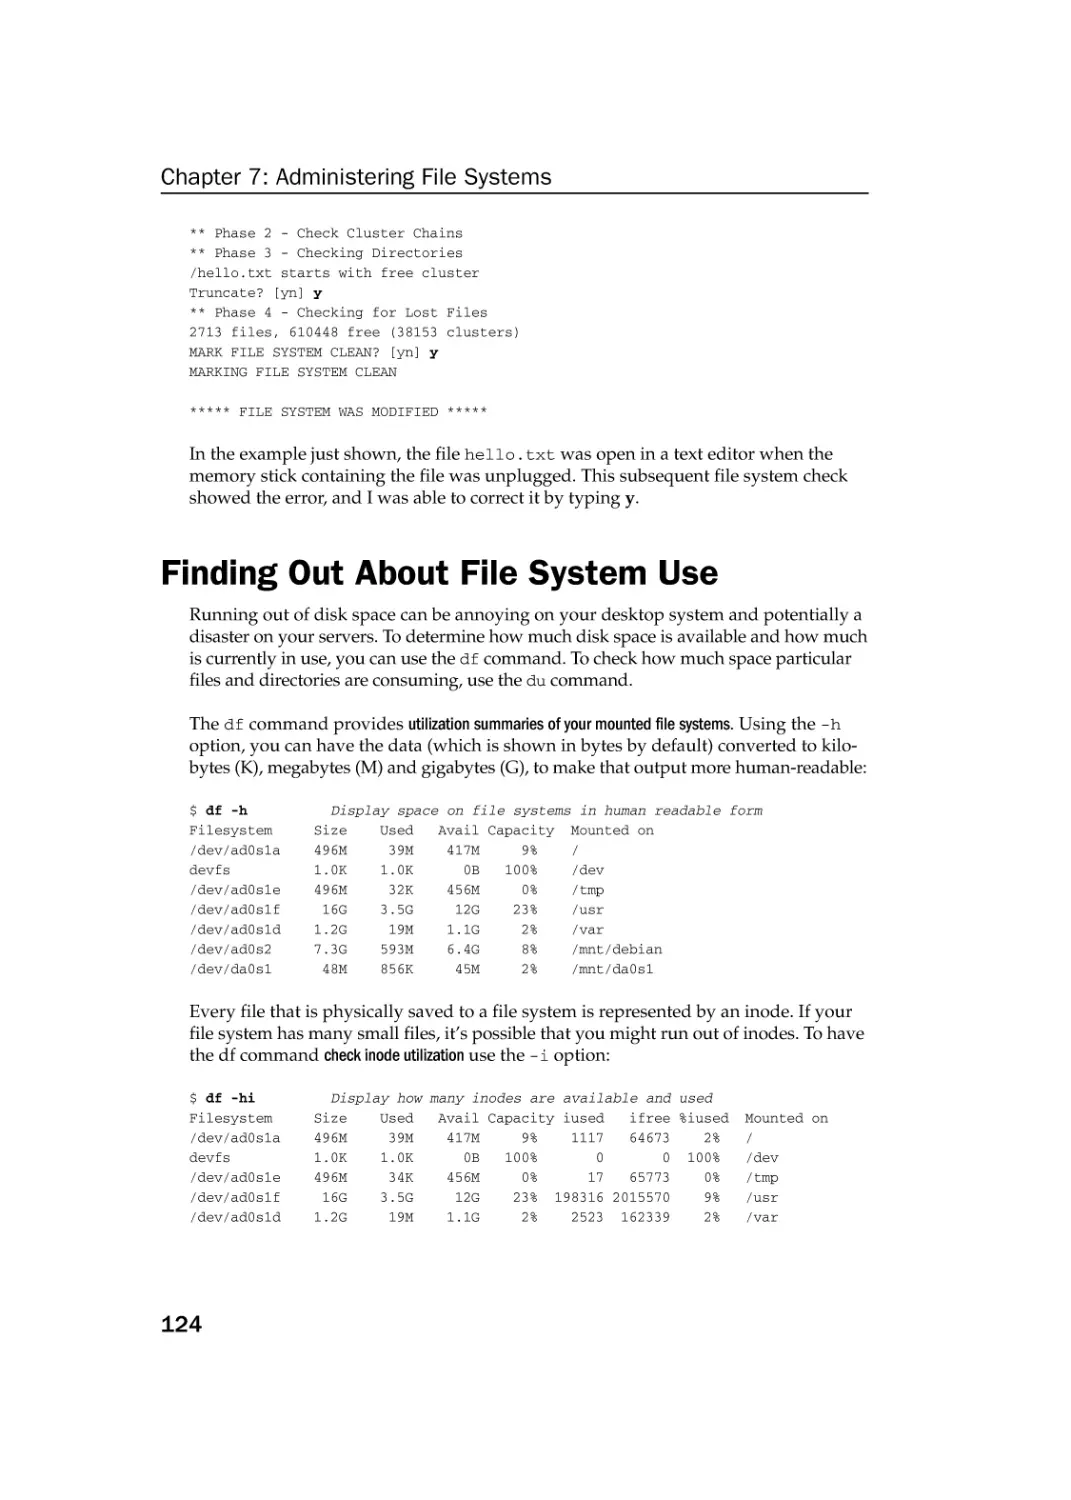 Finding Out About File System Use